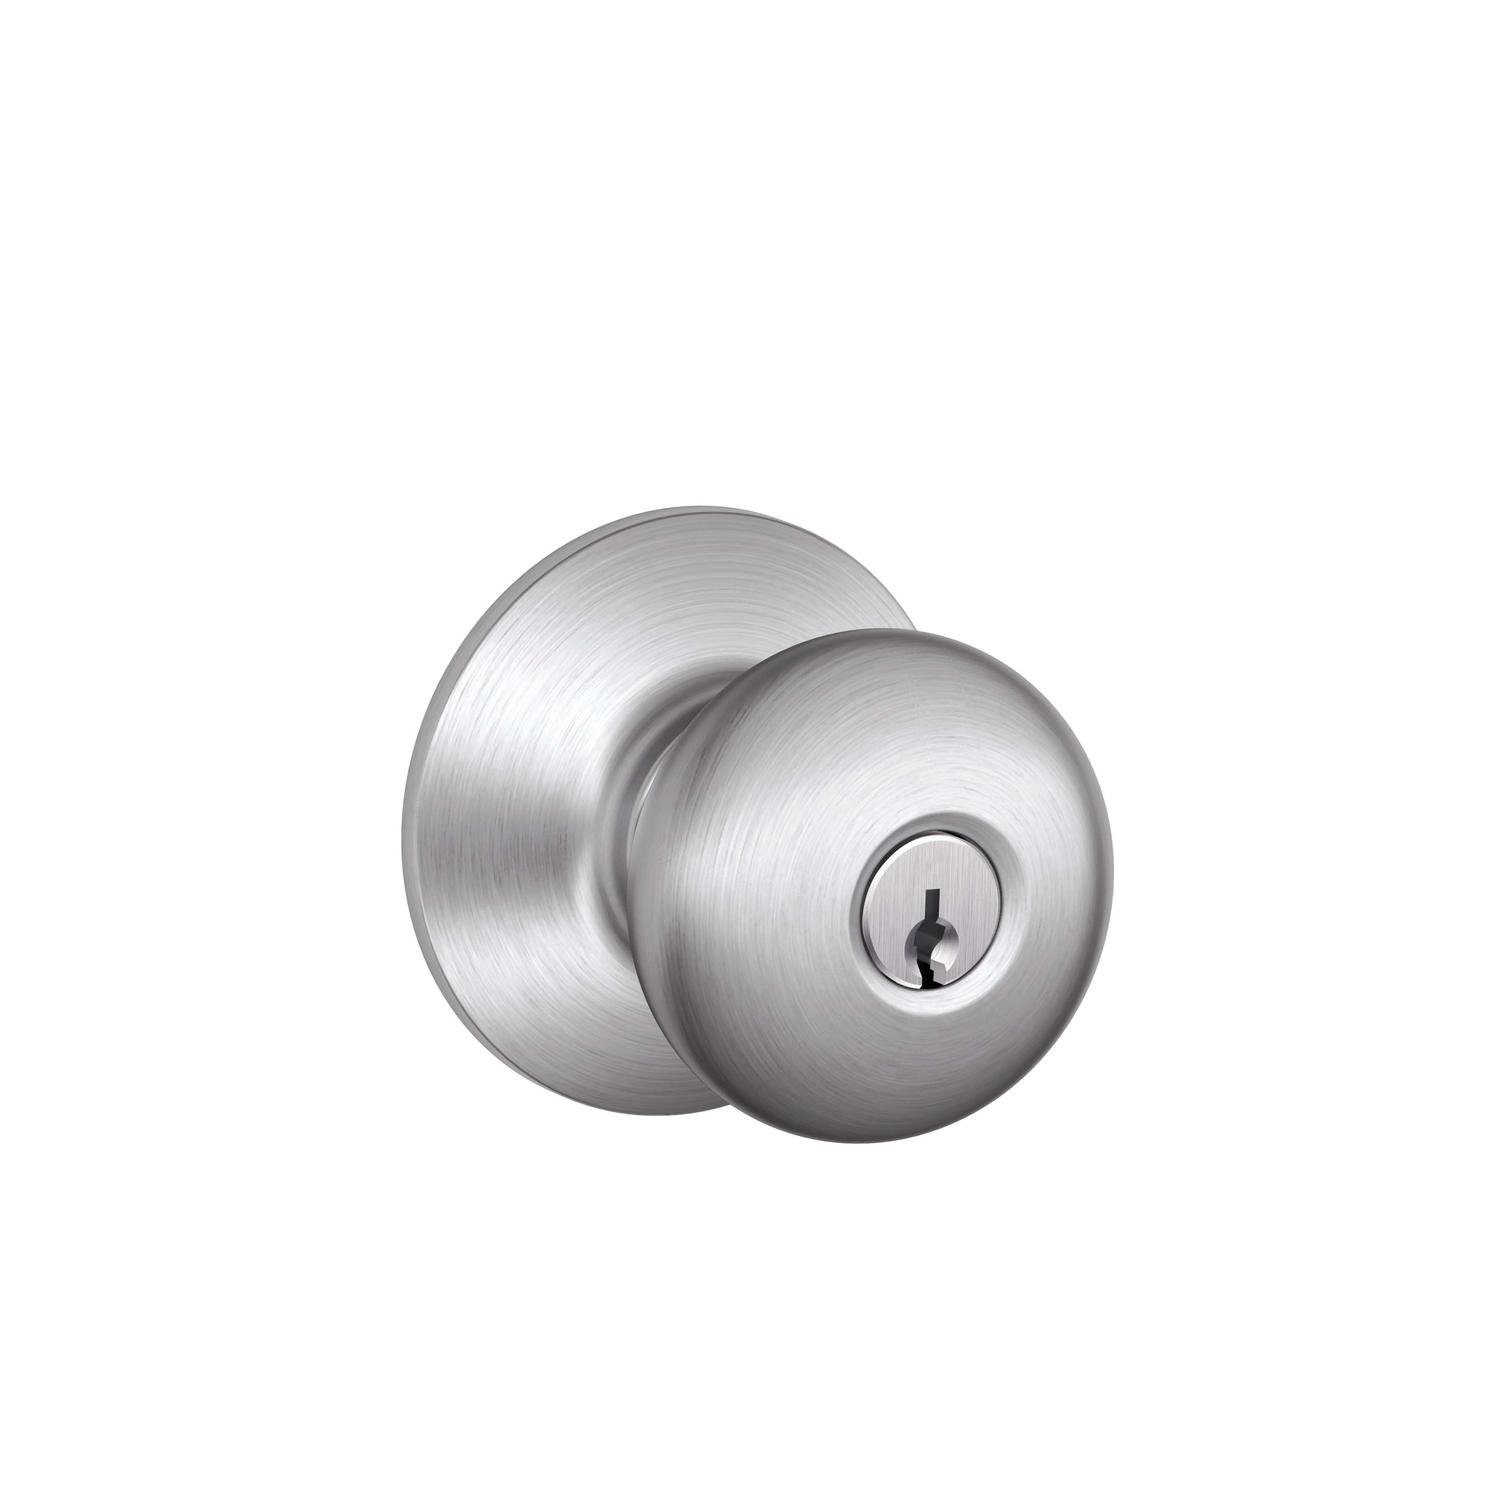 Photos - Door Handle Schlage Plymouth Satin Chrome Entry Knobs Key: K4 1-3/4 in. F51NPLY626K4